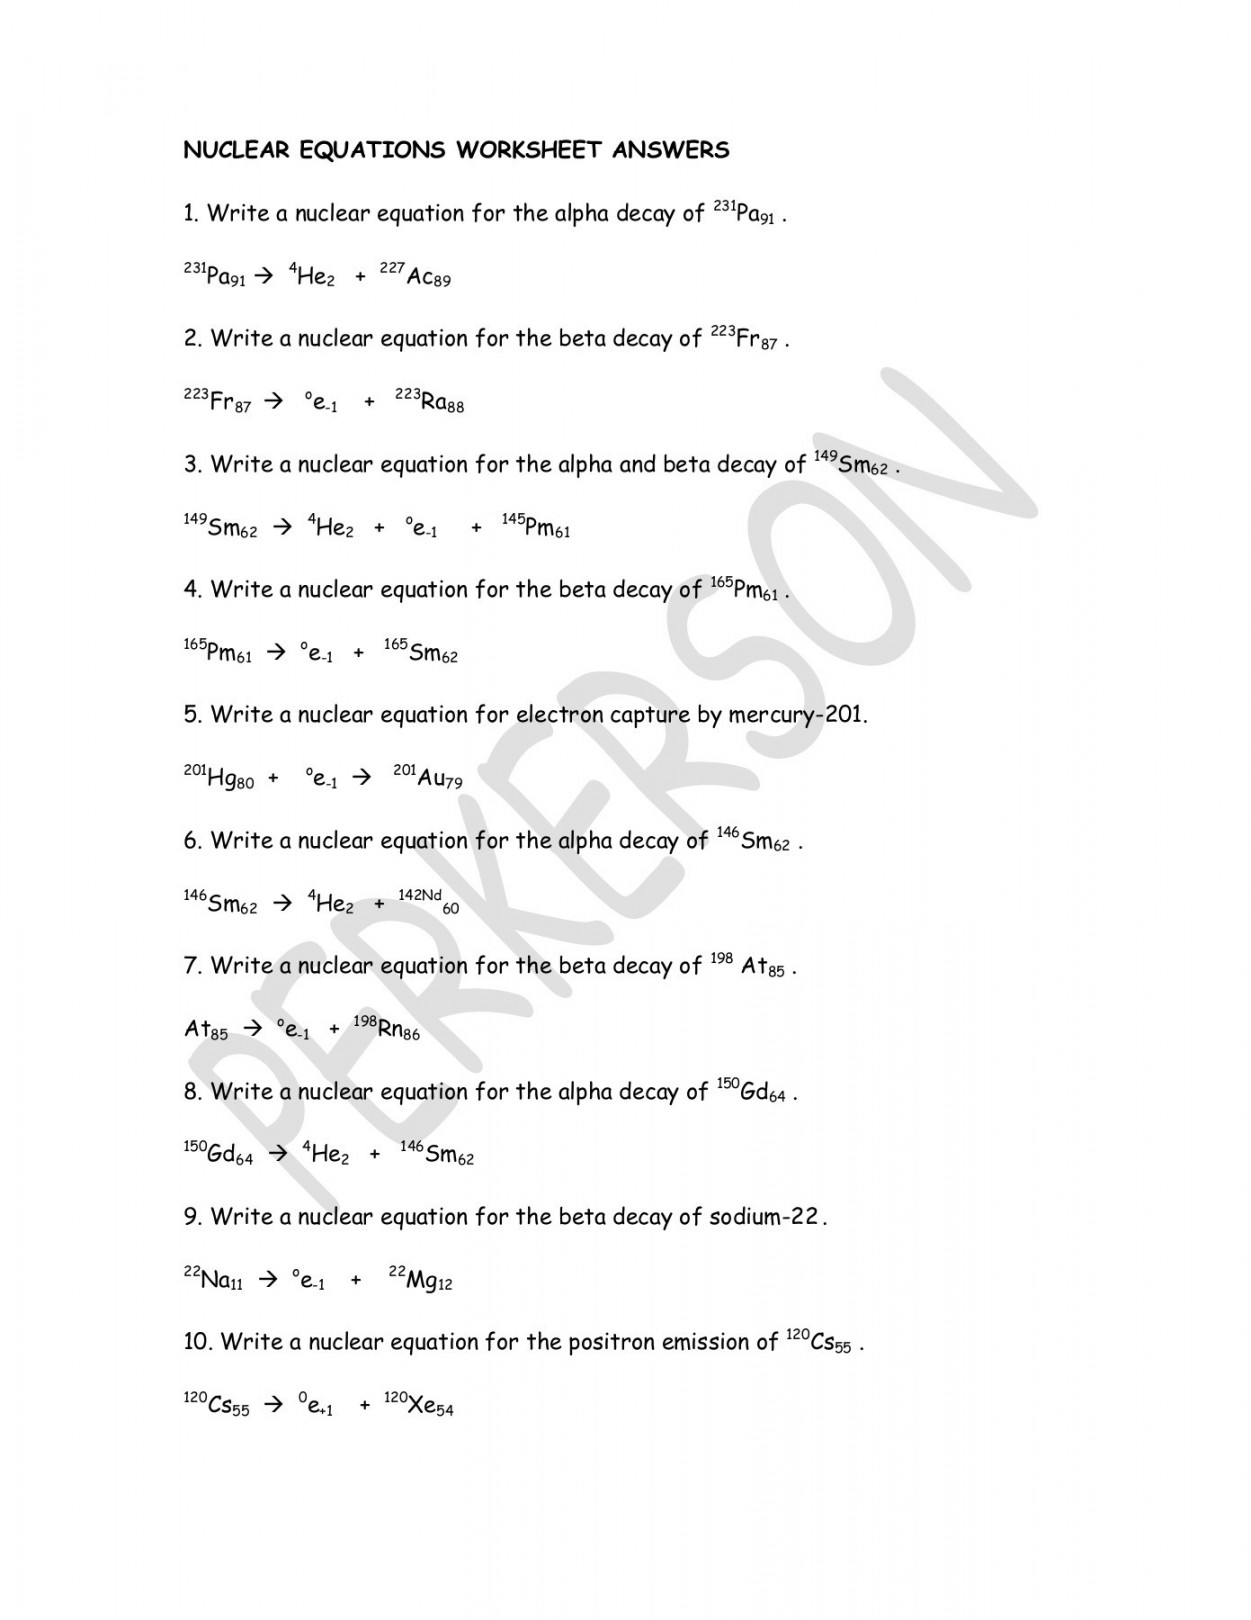 NUCLEAR EQUATIONS WORKSHEET ANSWERS - TypePad